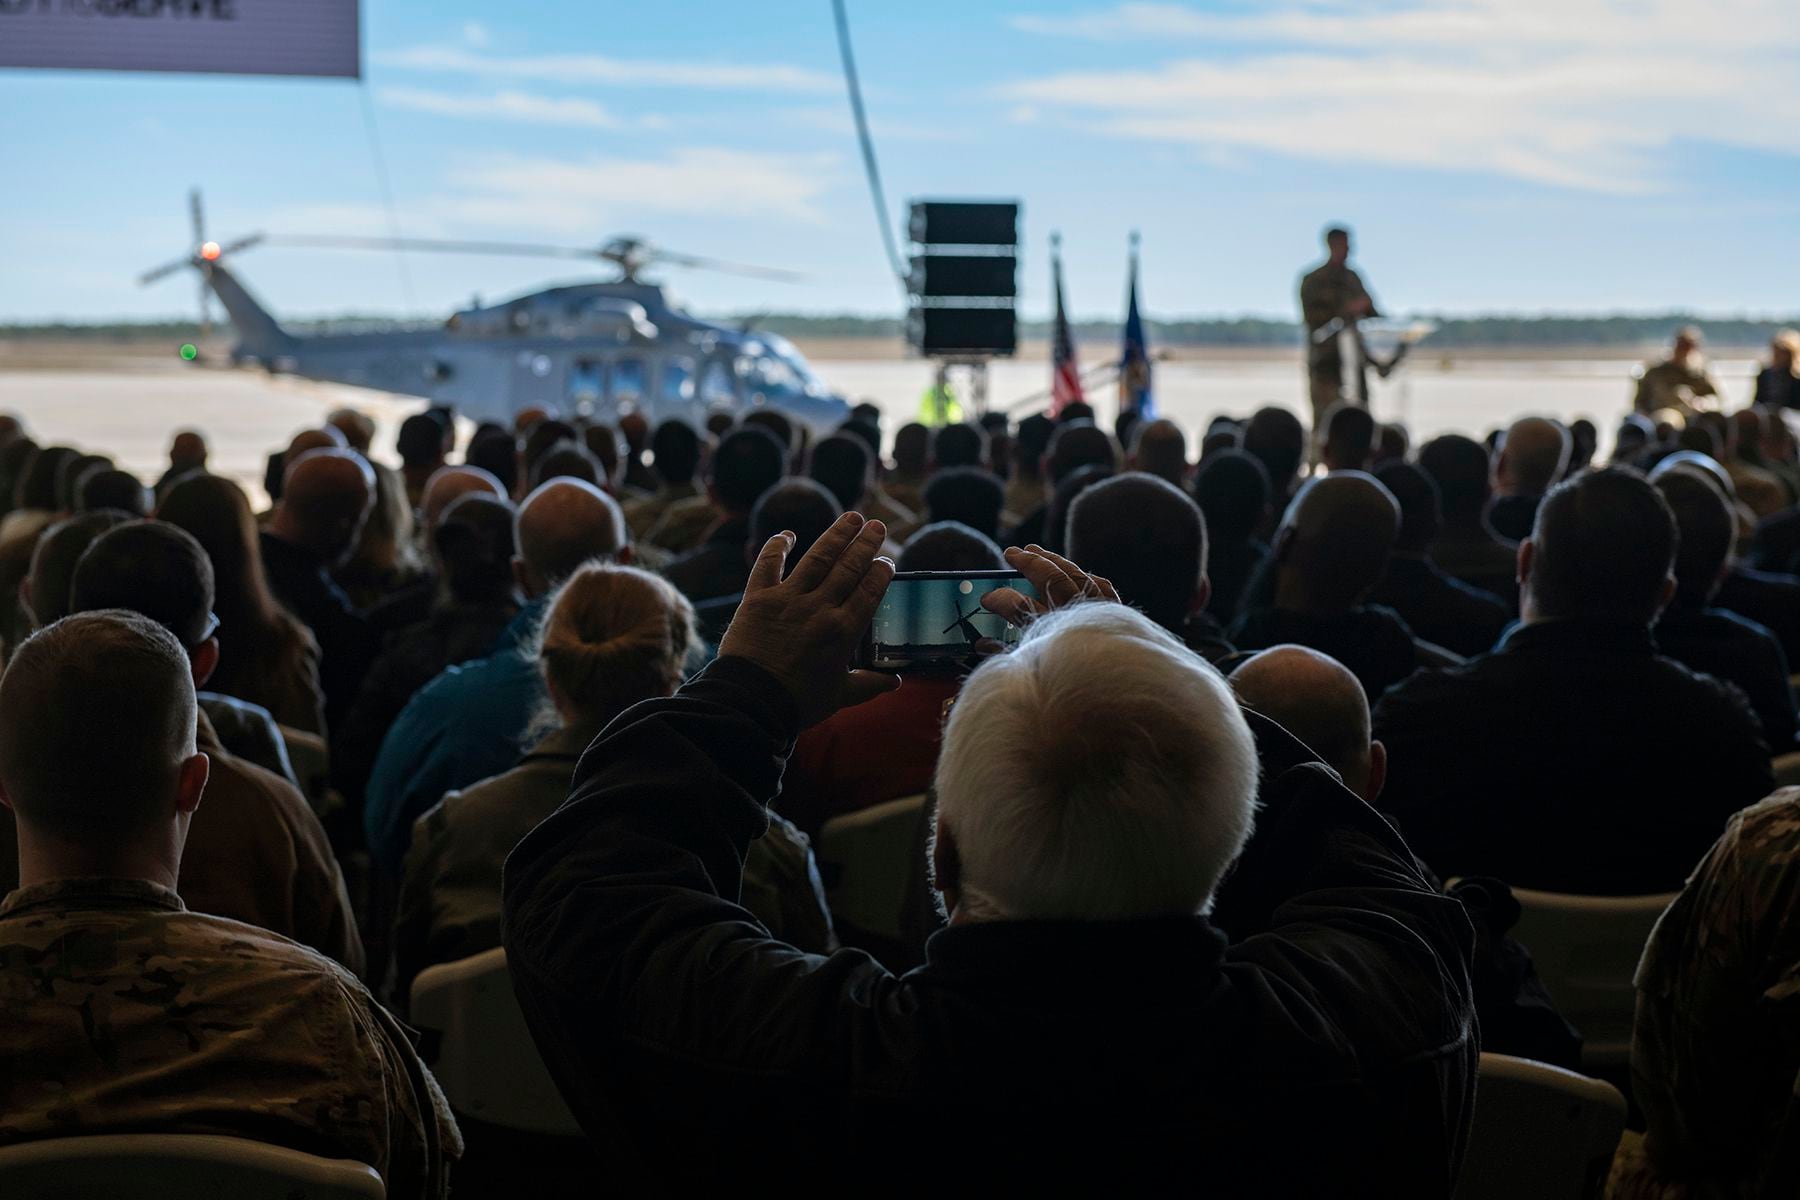 A crowd attends the naming ceremony for the MH-139 helicopter Dec. 19, 2019, at Duke Field, Fla. Organizers announced the replacement for the UH-1N would be called the Grey Wolf because of it's tactical abilities. (Senior Airman Dylan M. Gentile/Air Force)